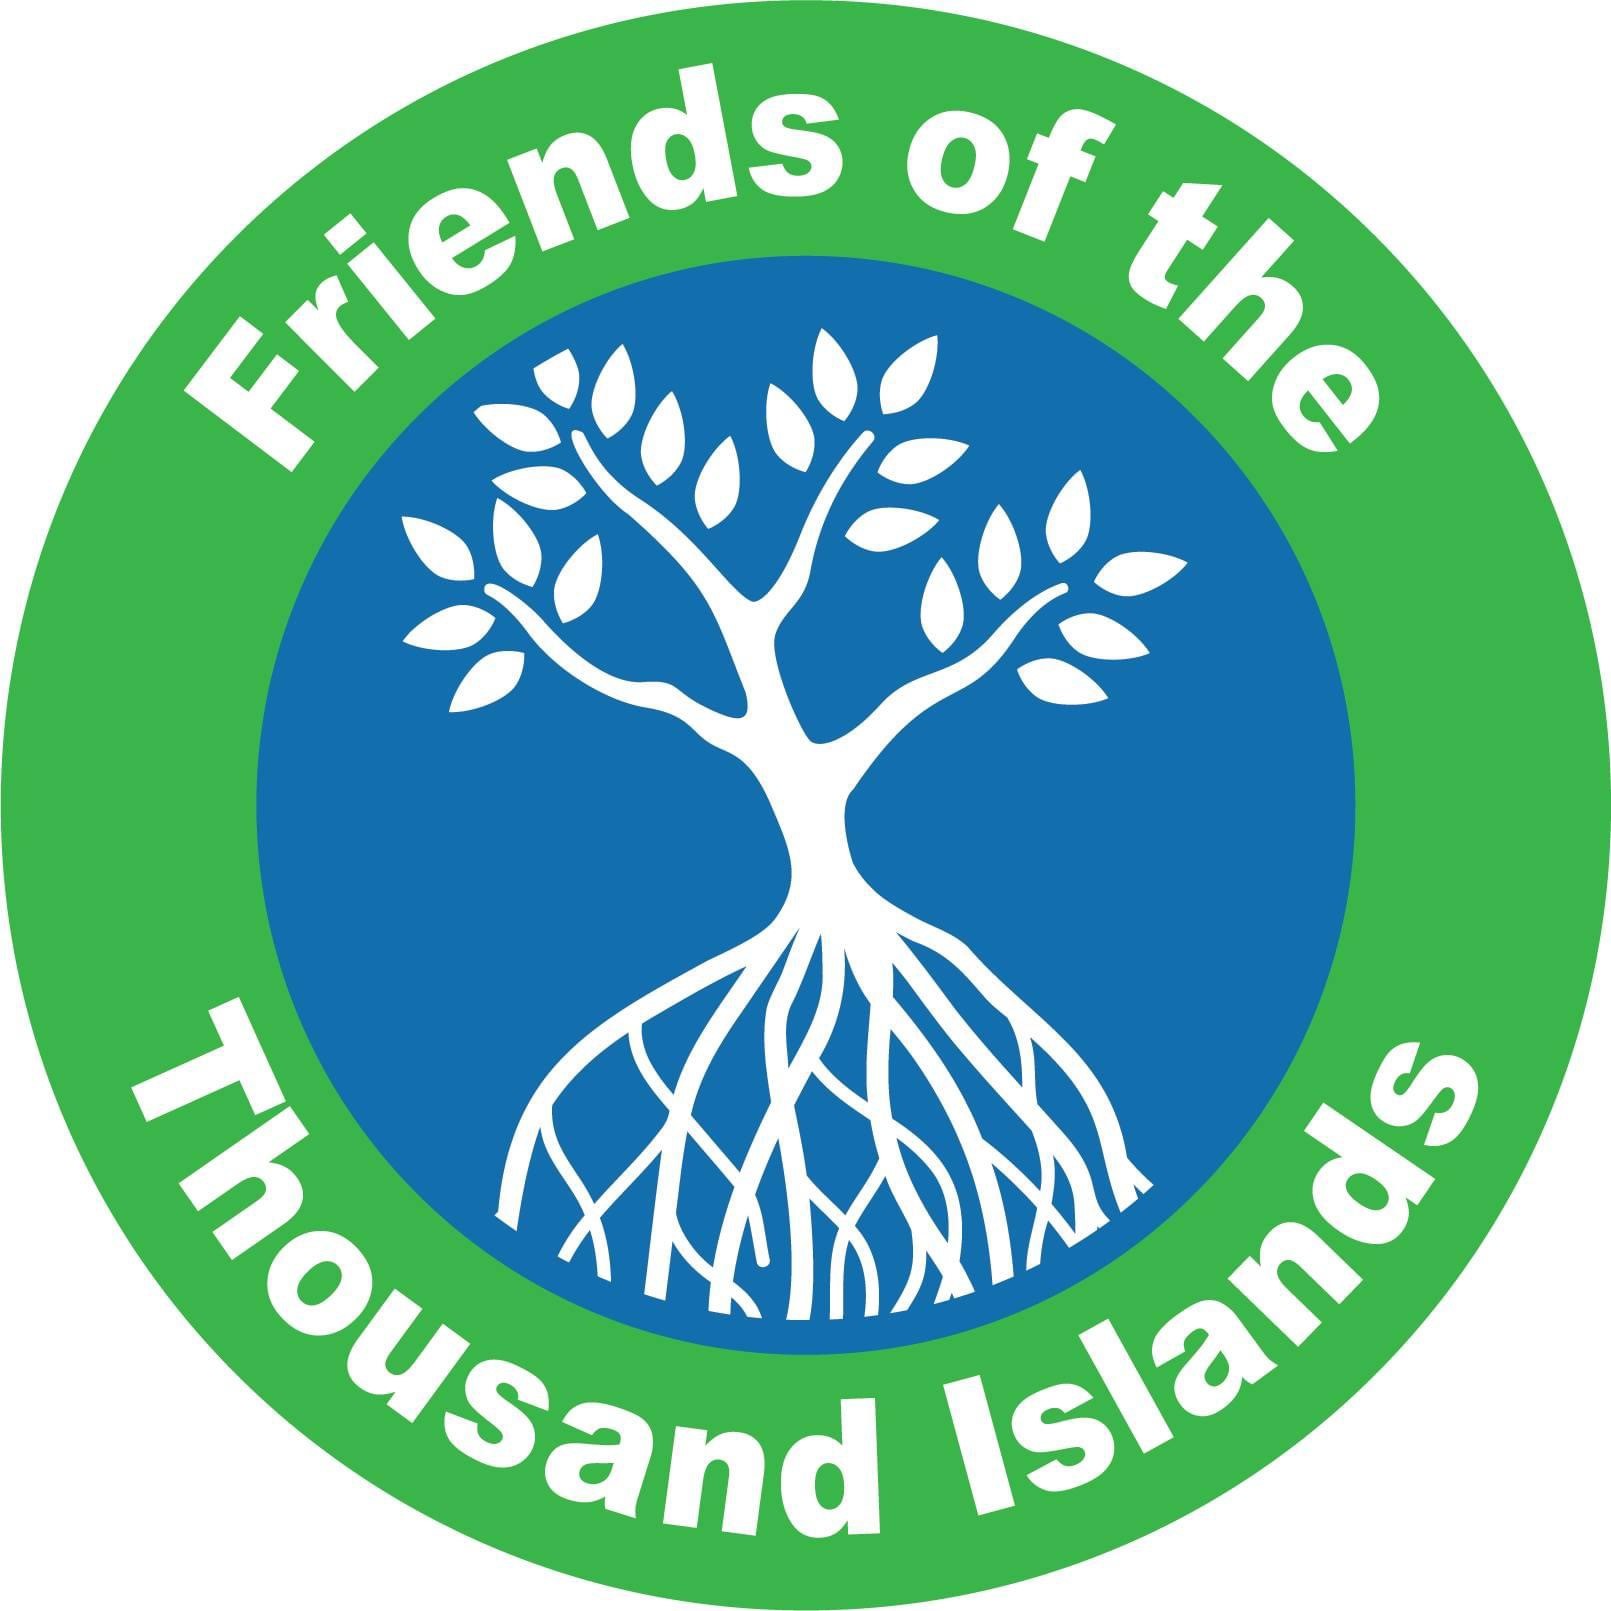 Friends of the Thousand Islands